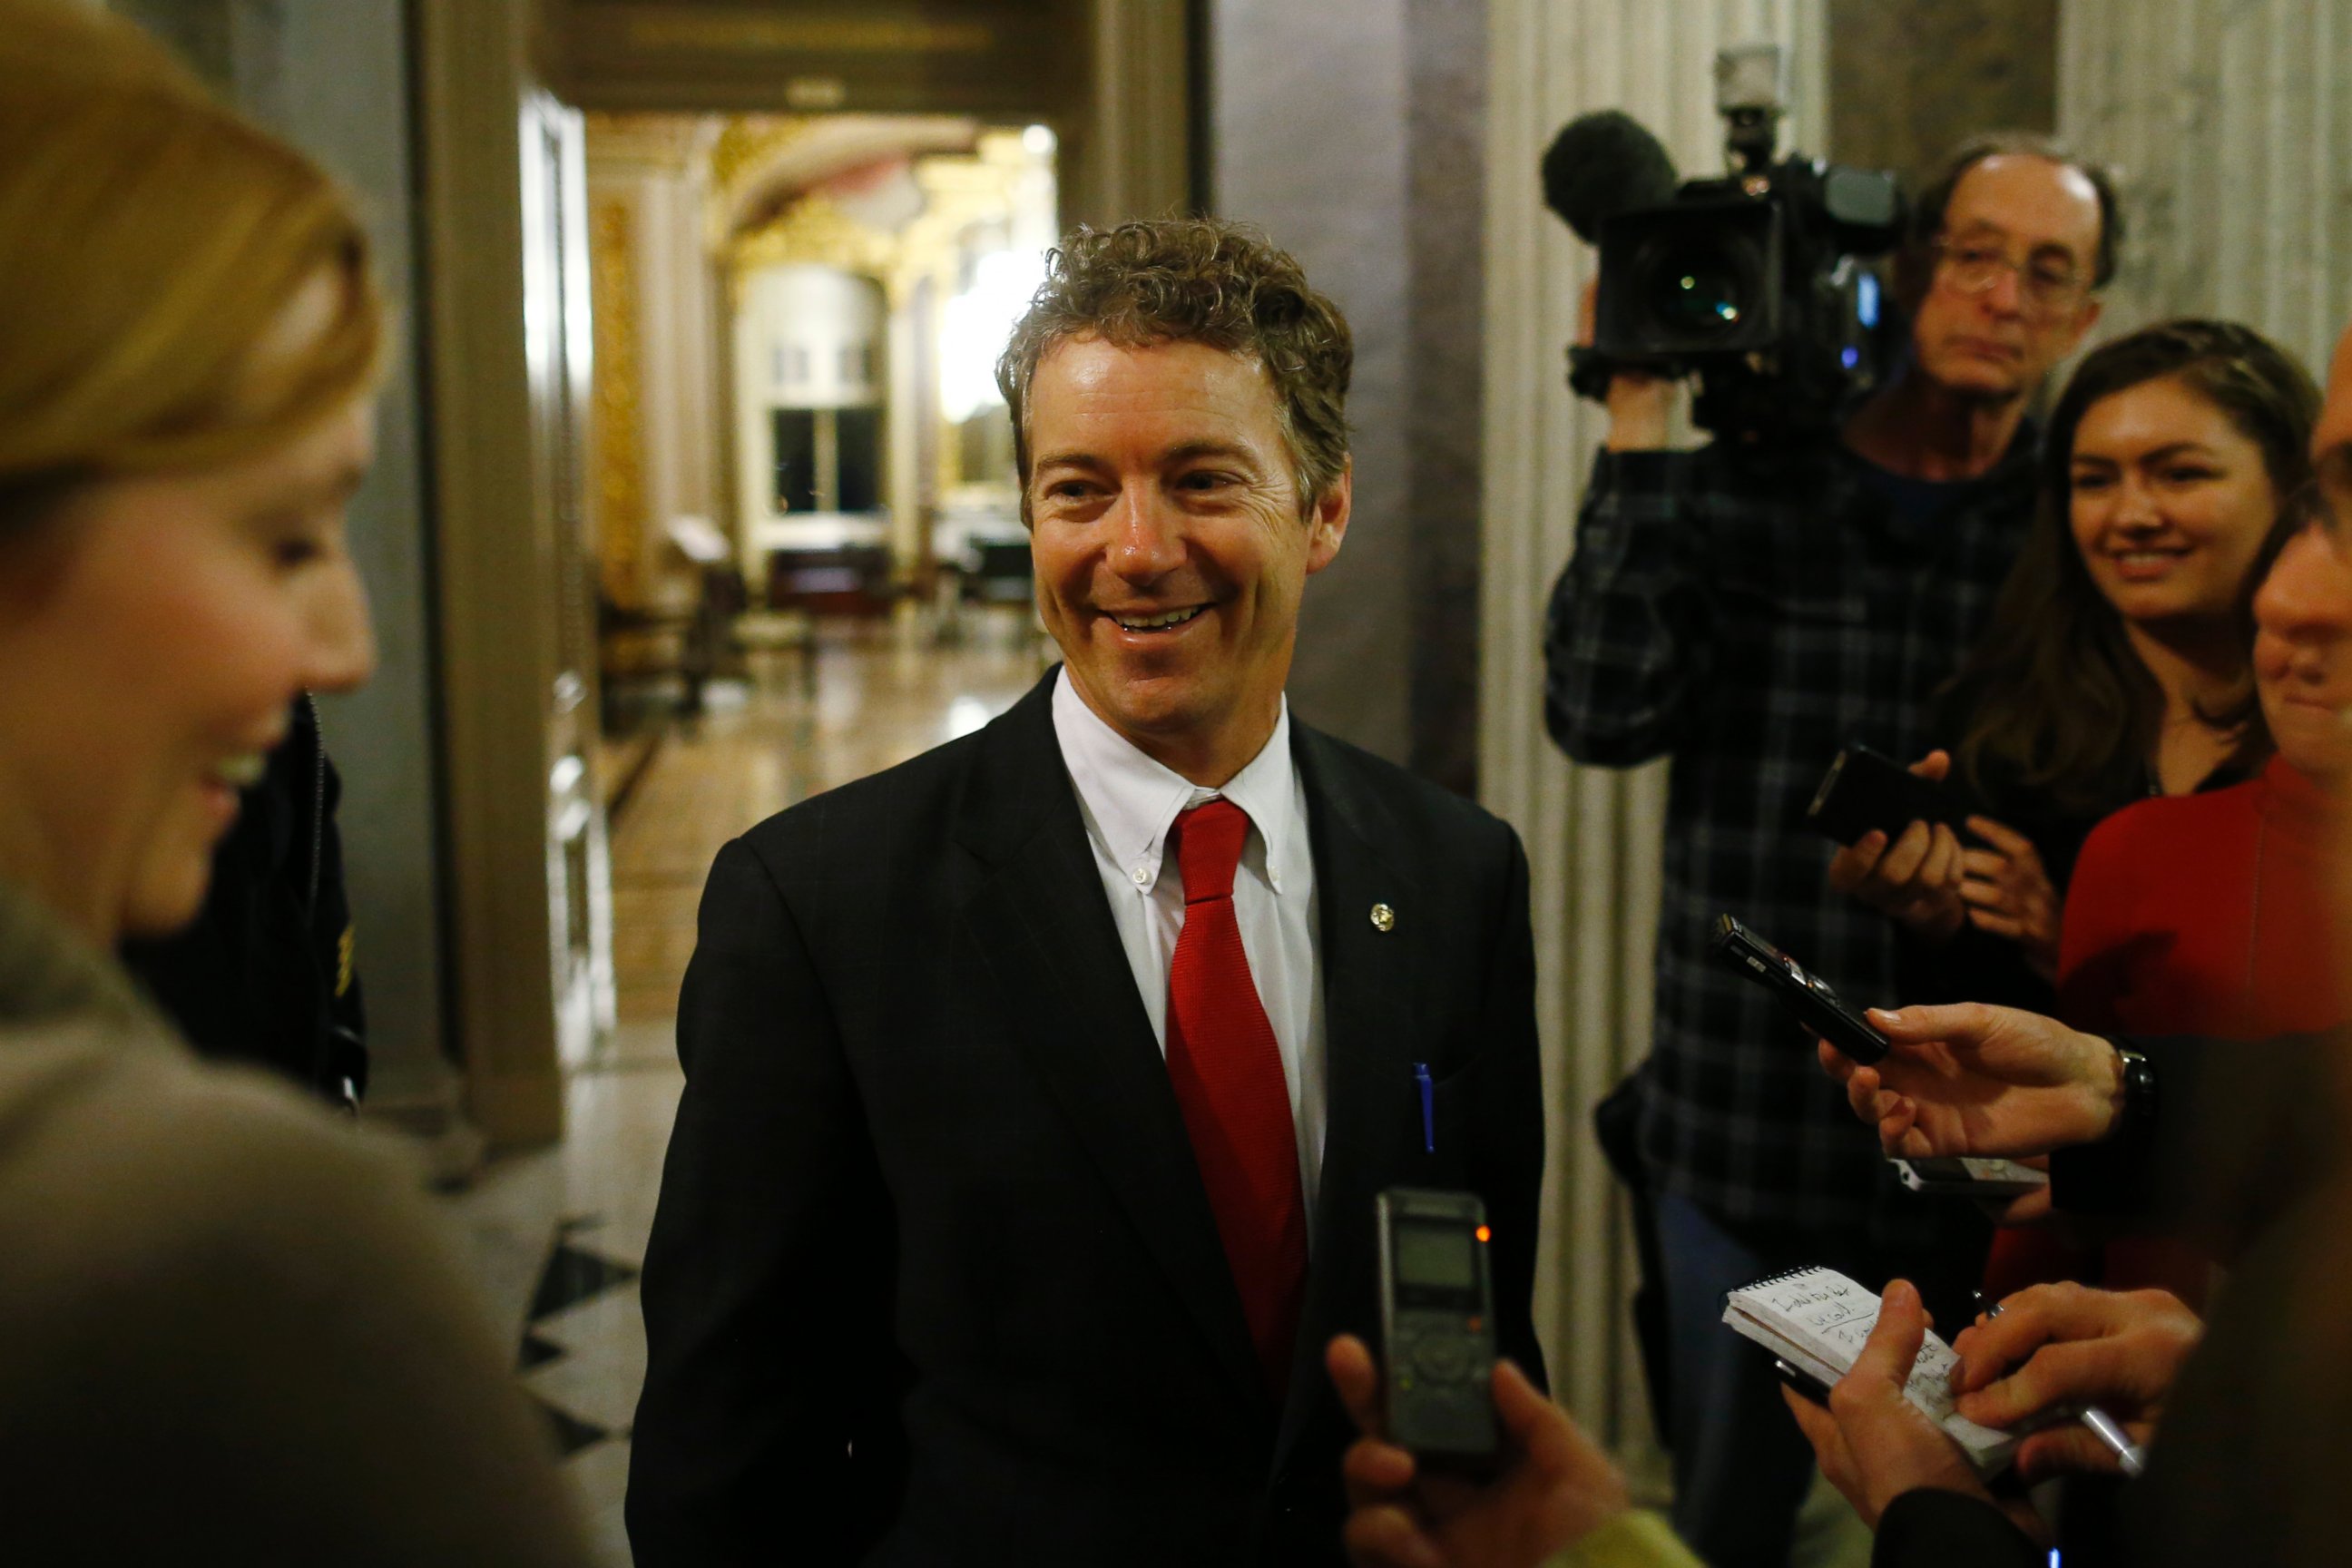 PHOTO: Sen. Rand Paul, leaves the floor of the Senate after his filibuster of the nomination of John Brennan to be CIA director on Capitol Hill in Washington, March 7, 2013.